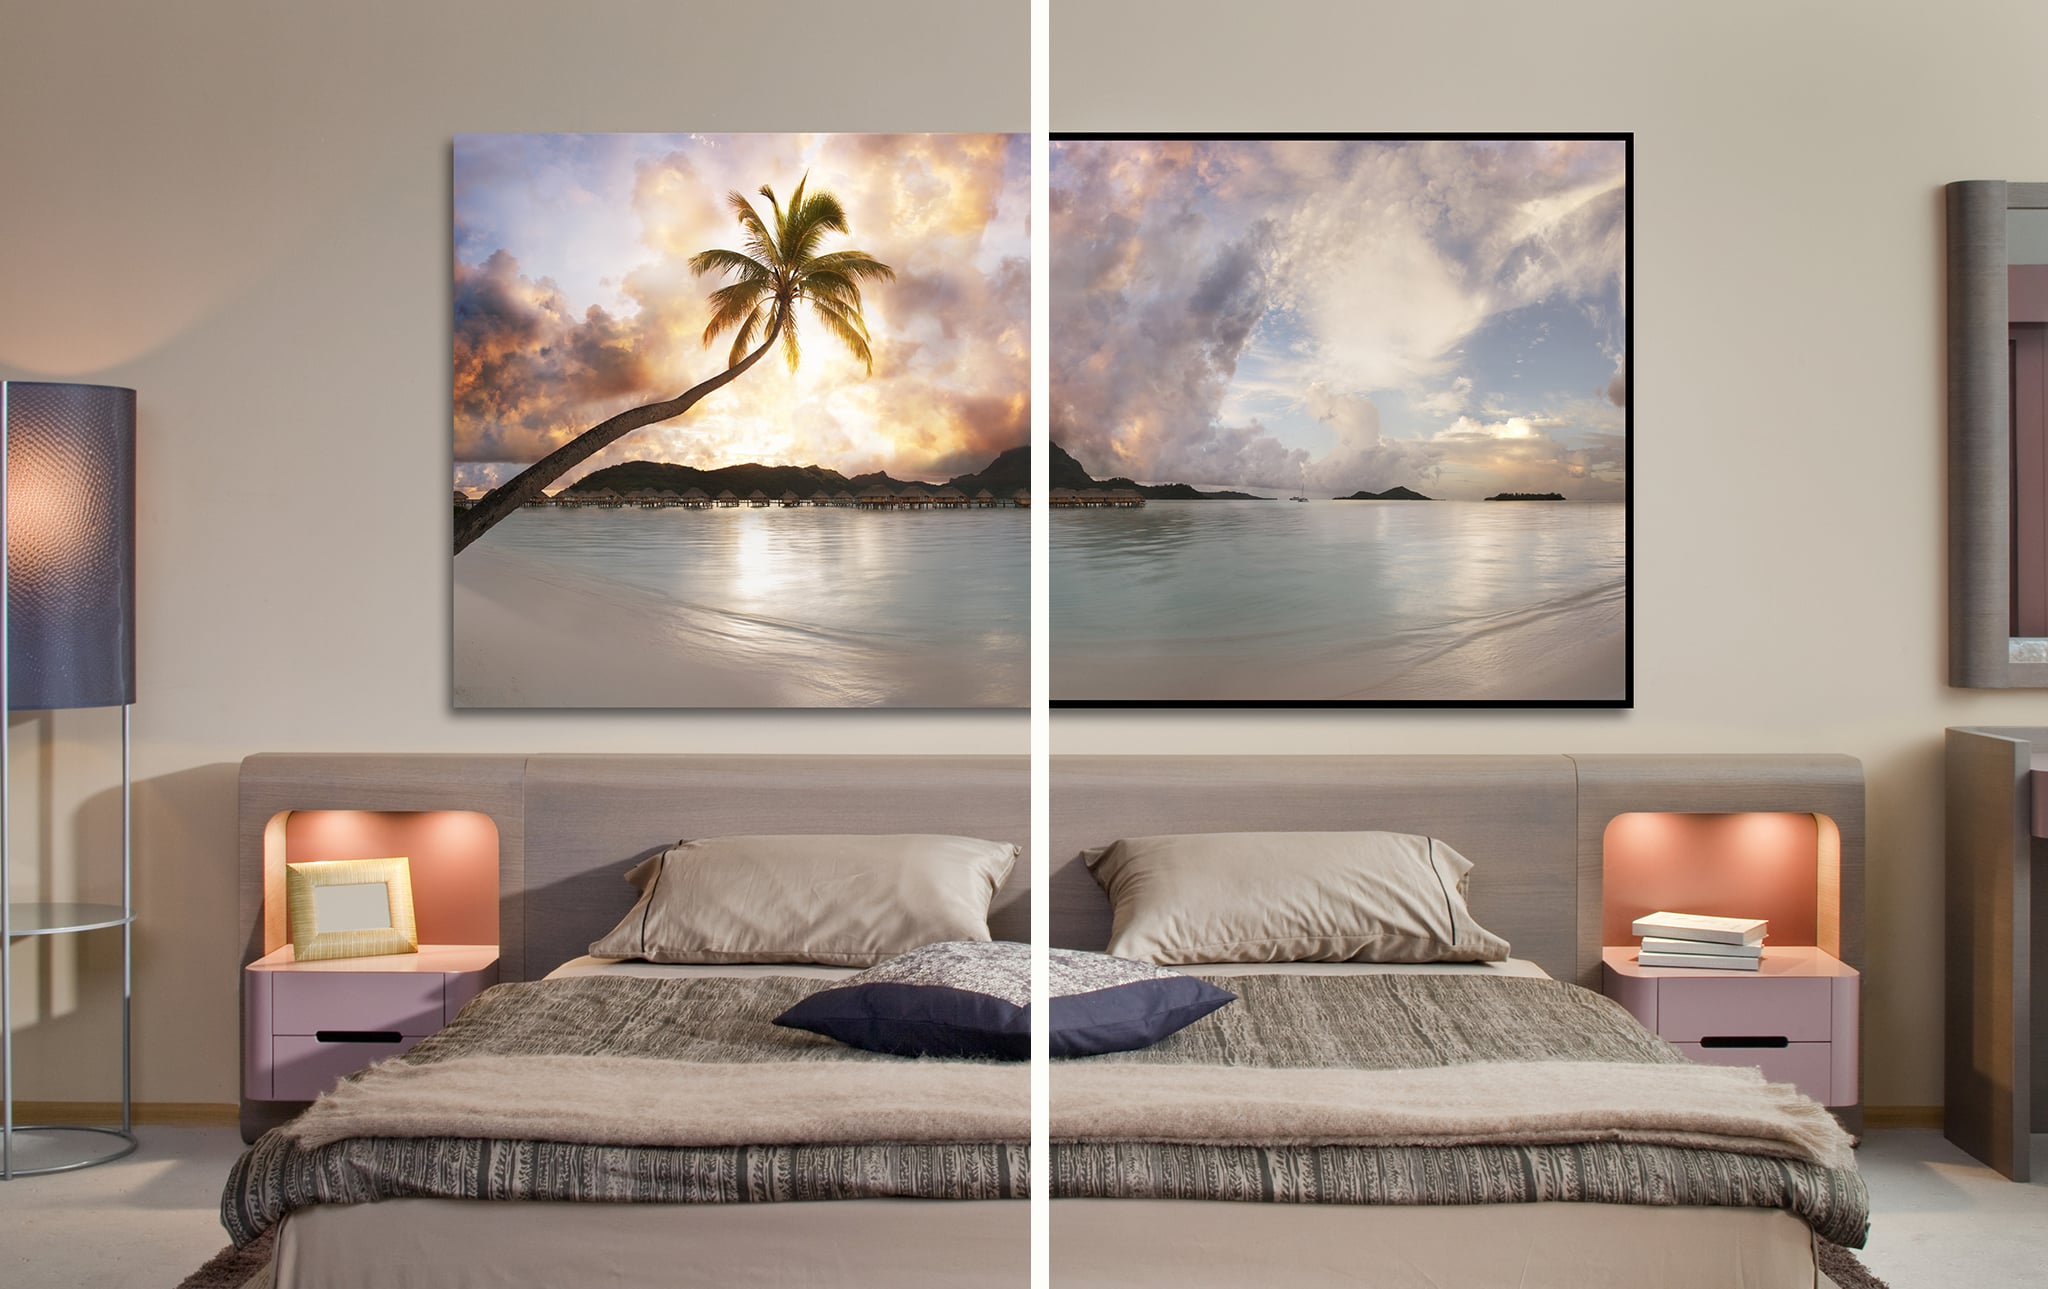 How to Choose Between Canvas and Framed Prints